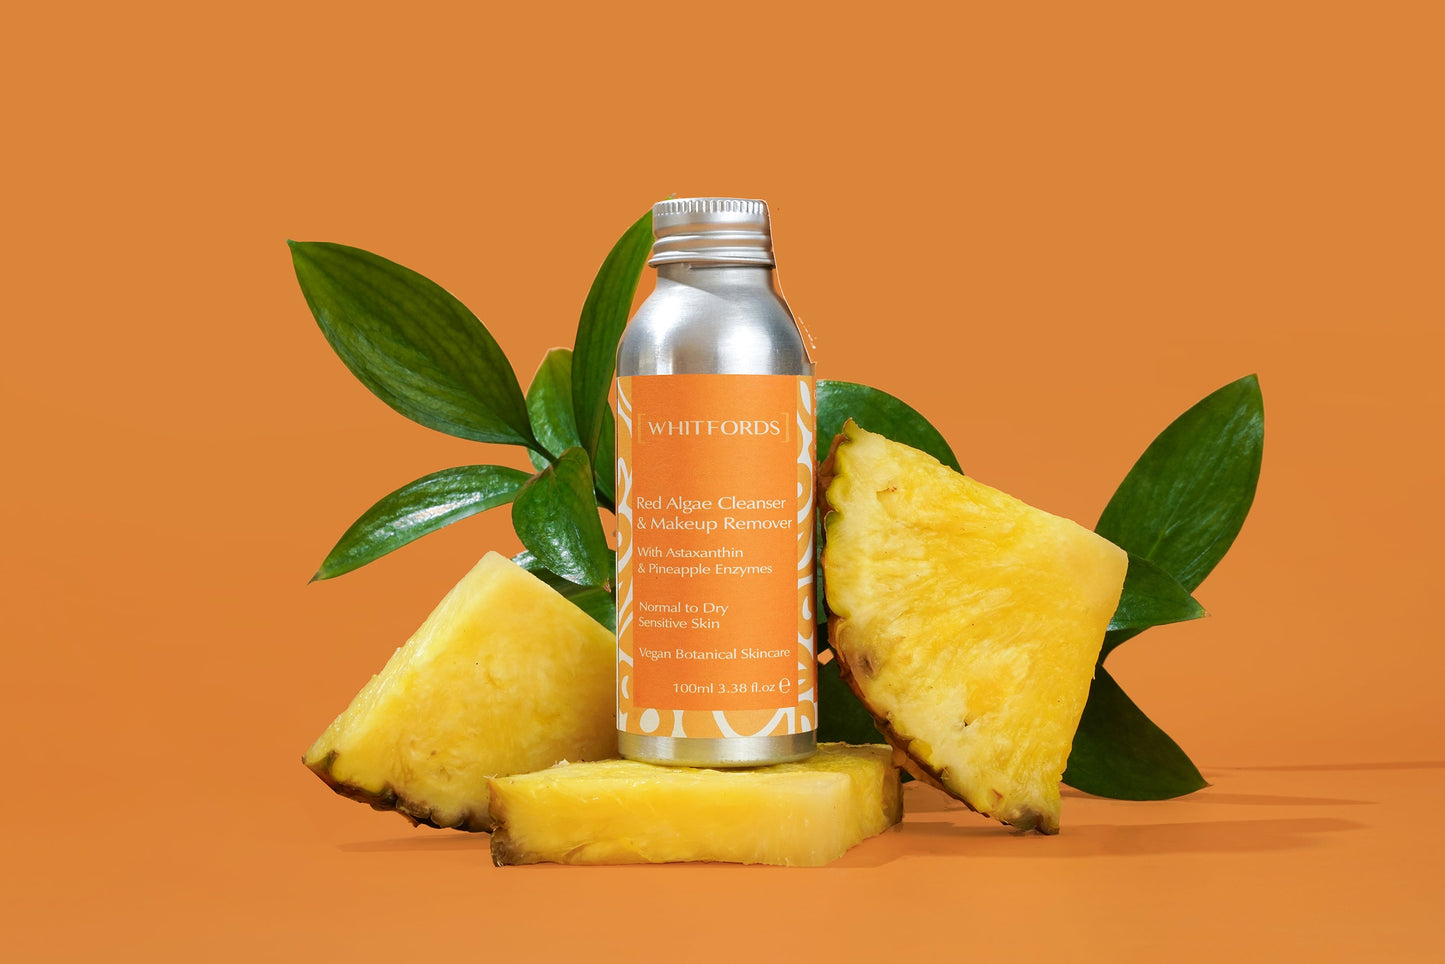 cleansing oil and eye make up remover in aluminium bottle with orange label on an orange background with pineapples surrounding it